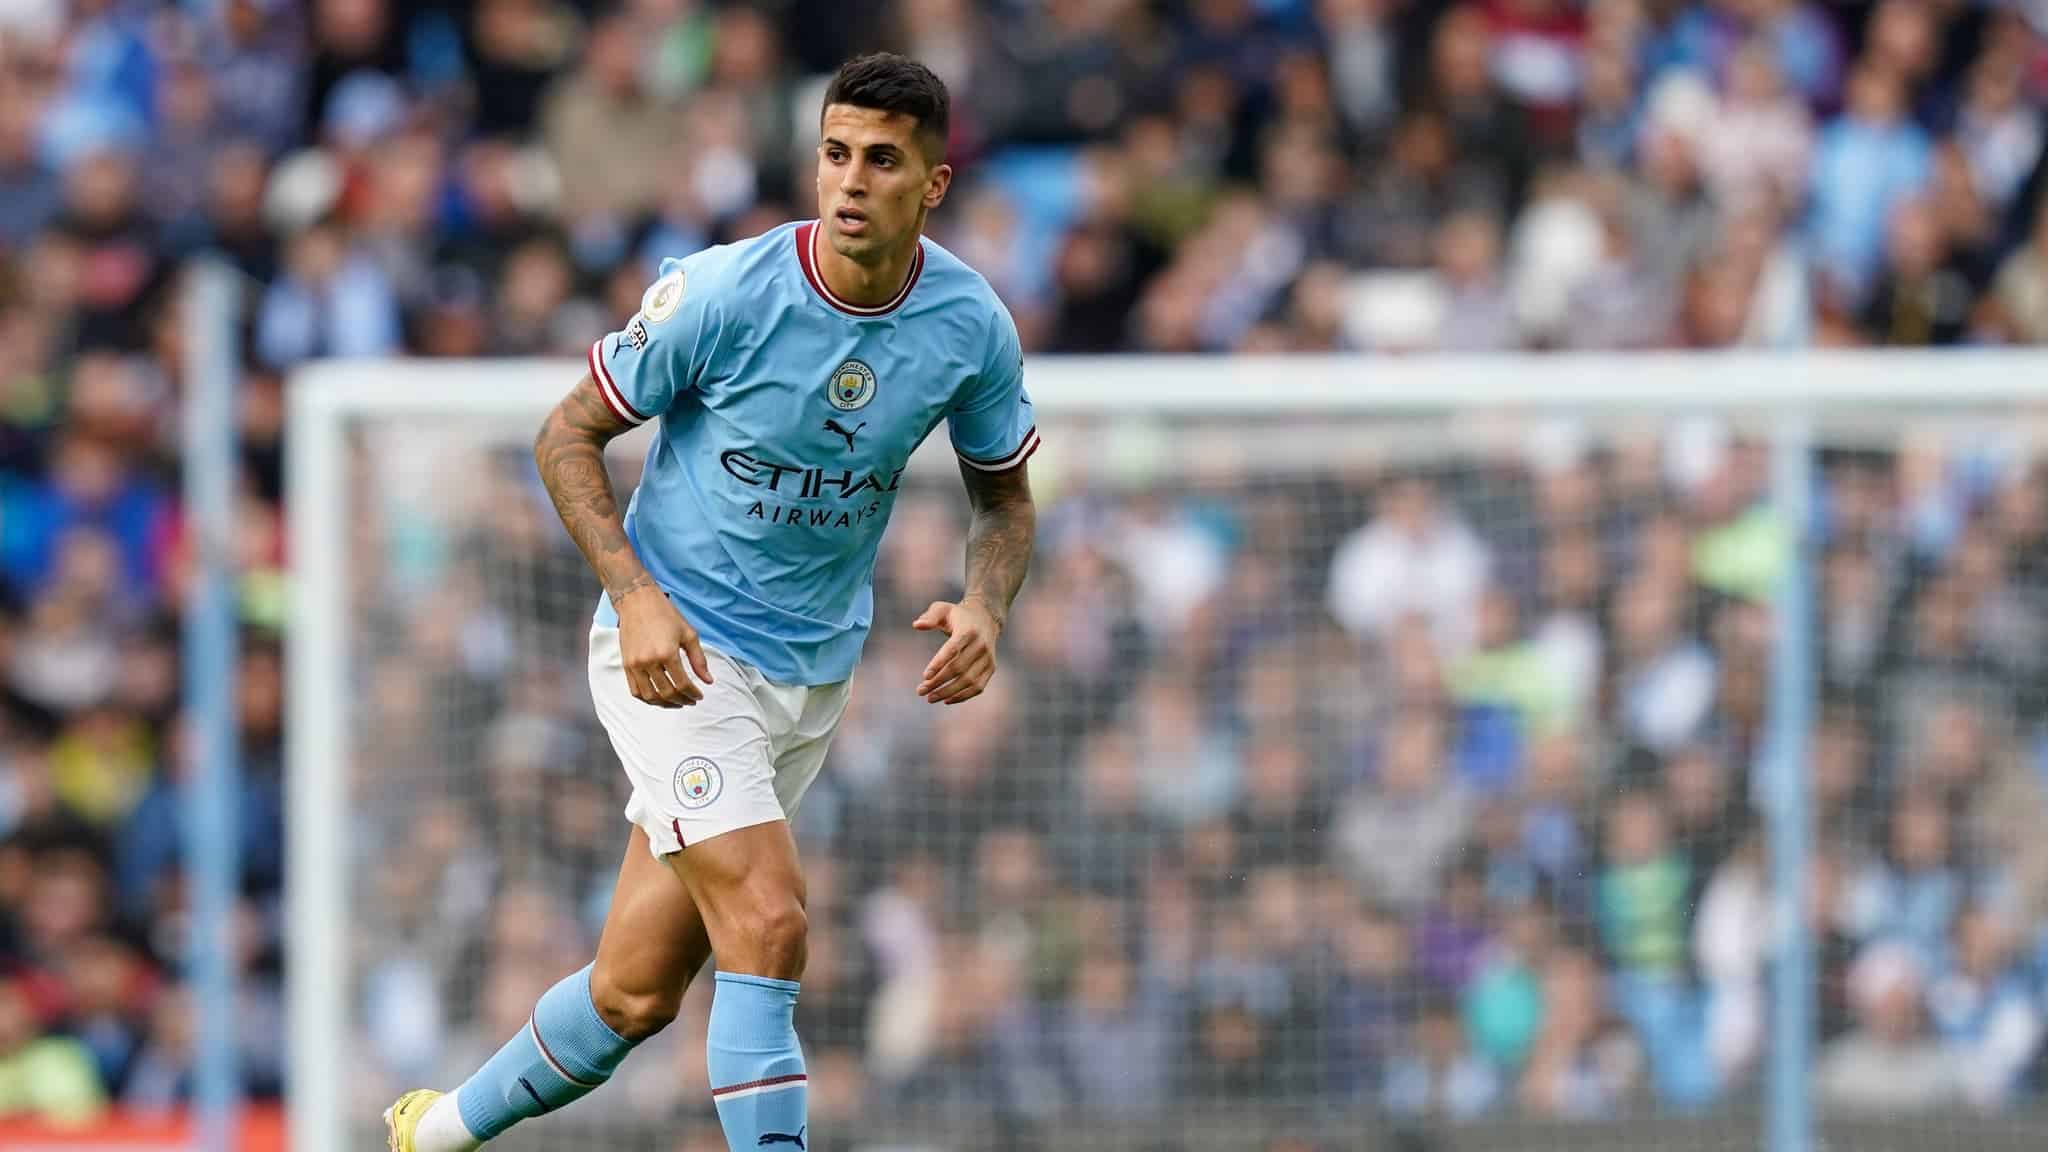 Manchester England 22nd October 2022 Joao Cancelo of Manchester City during the Premier League match at the Etihad Stadium Manchester 1684118